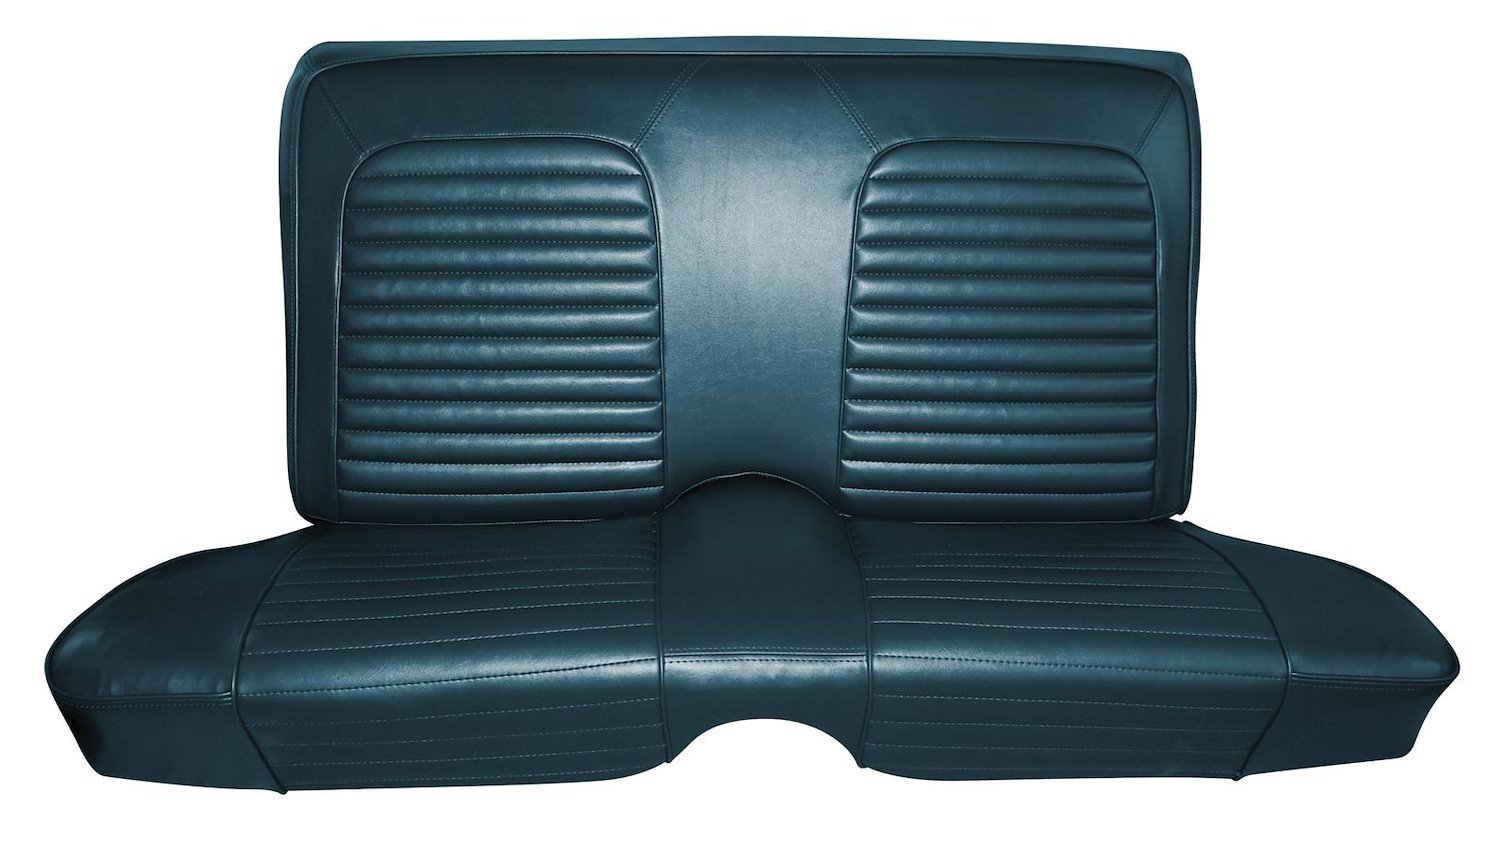 1967 Ford Fairlane 500 2-Door Hardtop Interior Two-Tone Rear Bench Seat Upholstery Set